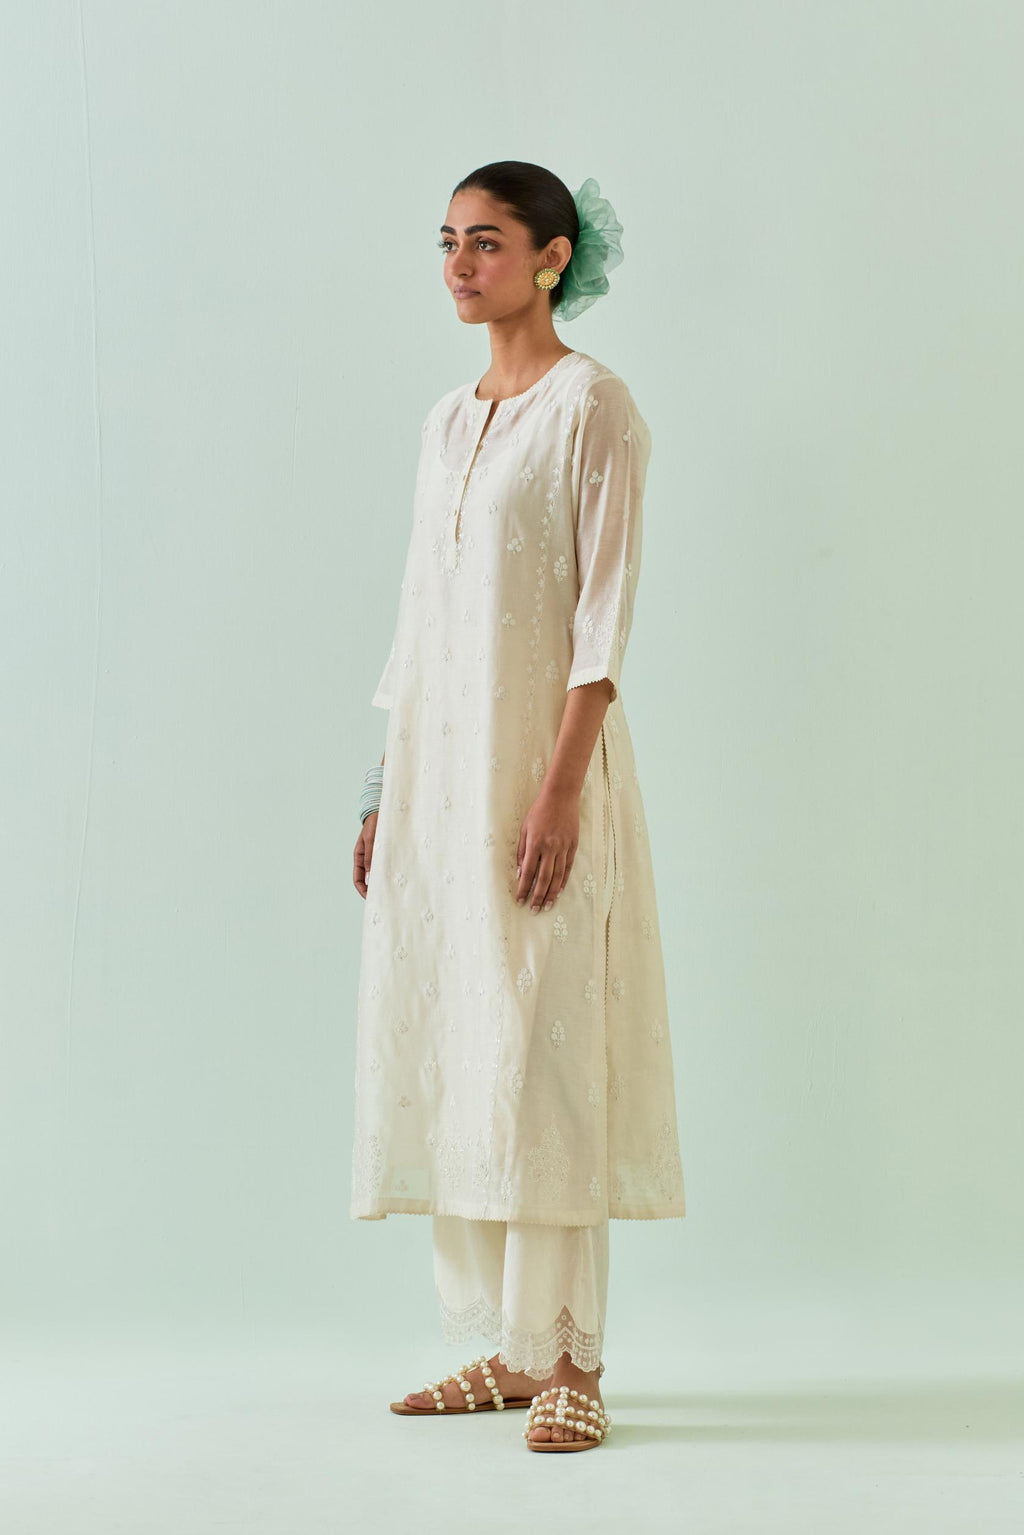 off white straight kurta set with all-over off white Dori embroidery, highlighted with delicate beaded work and embroidery detail at side panel joint seams.